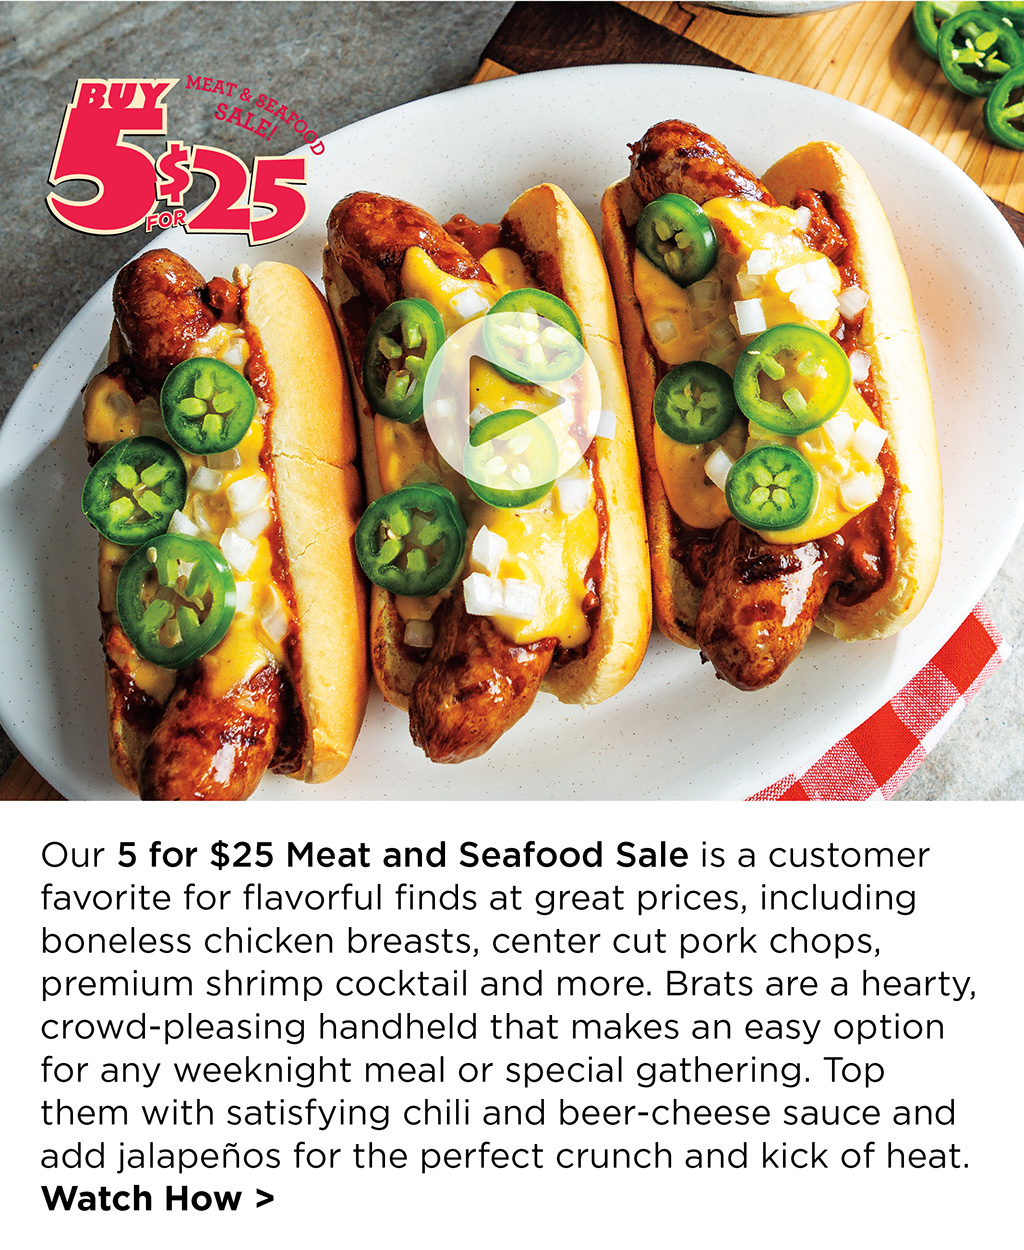 Our 5 for $25 Meat and Seafood Sale is a customer favorite for flavorful finds at great prices, including boneless chicken breasts, center cut pork chops, premium shrimp cocktail and more. Brats are a hearty, crowd-pleasing handheld that makes an easy option for any weeknight meal or special gathering. Top them with satisfying chili and beer-cheese sauce and add jalapeos for the perfect crunch and kick of heat. Watch How >